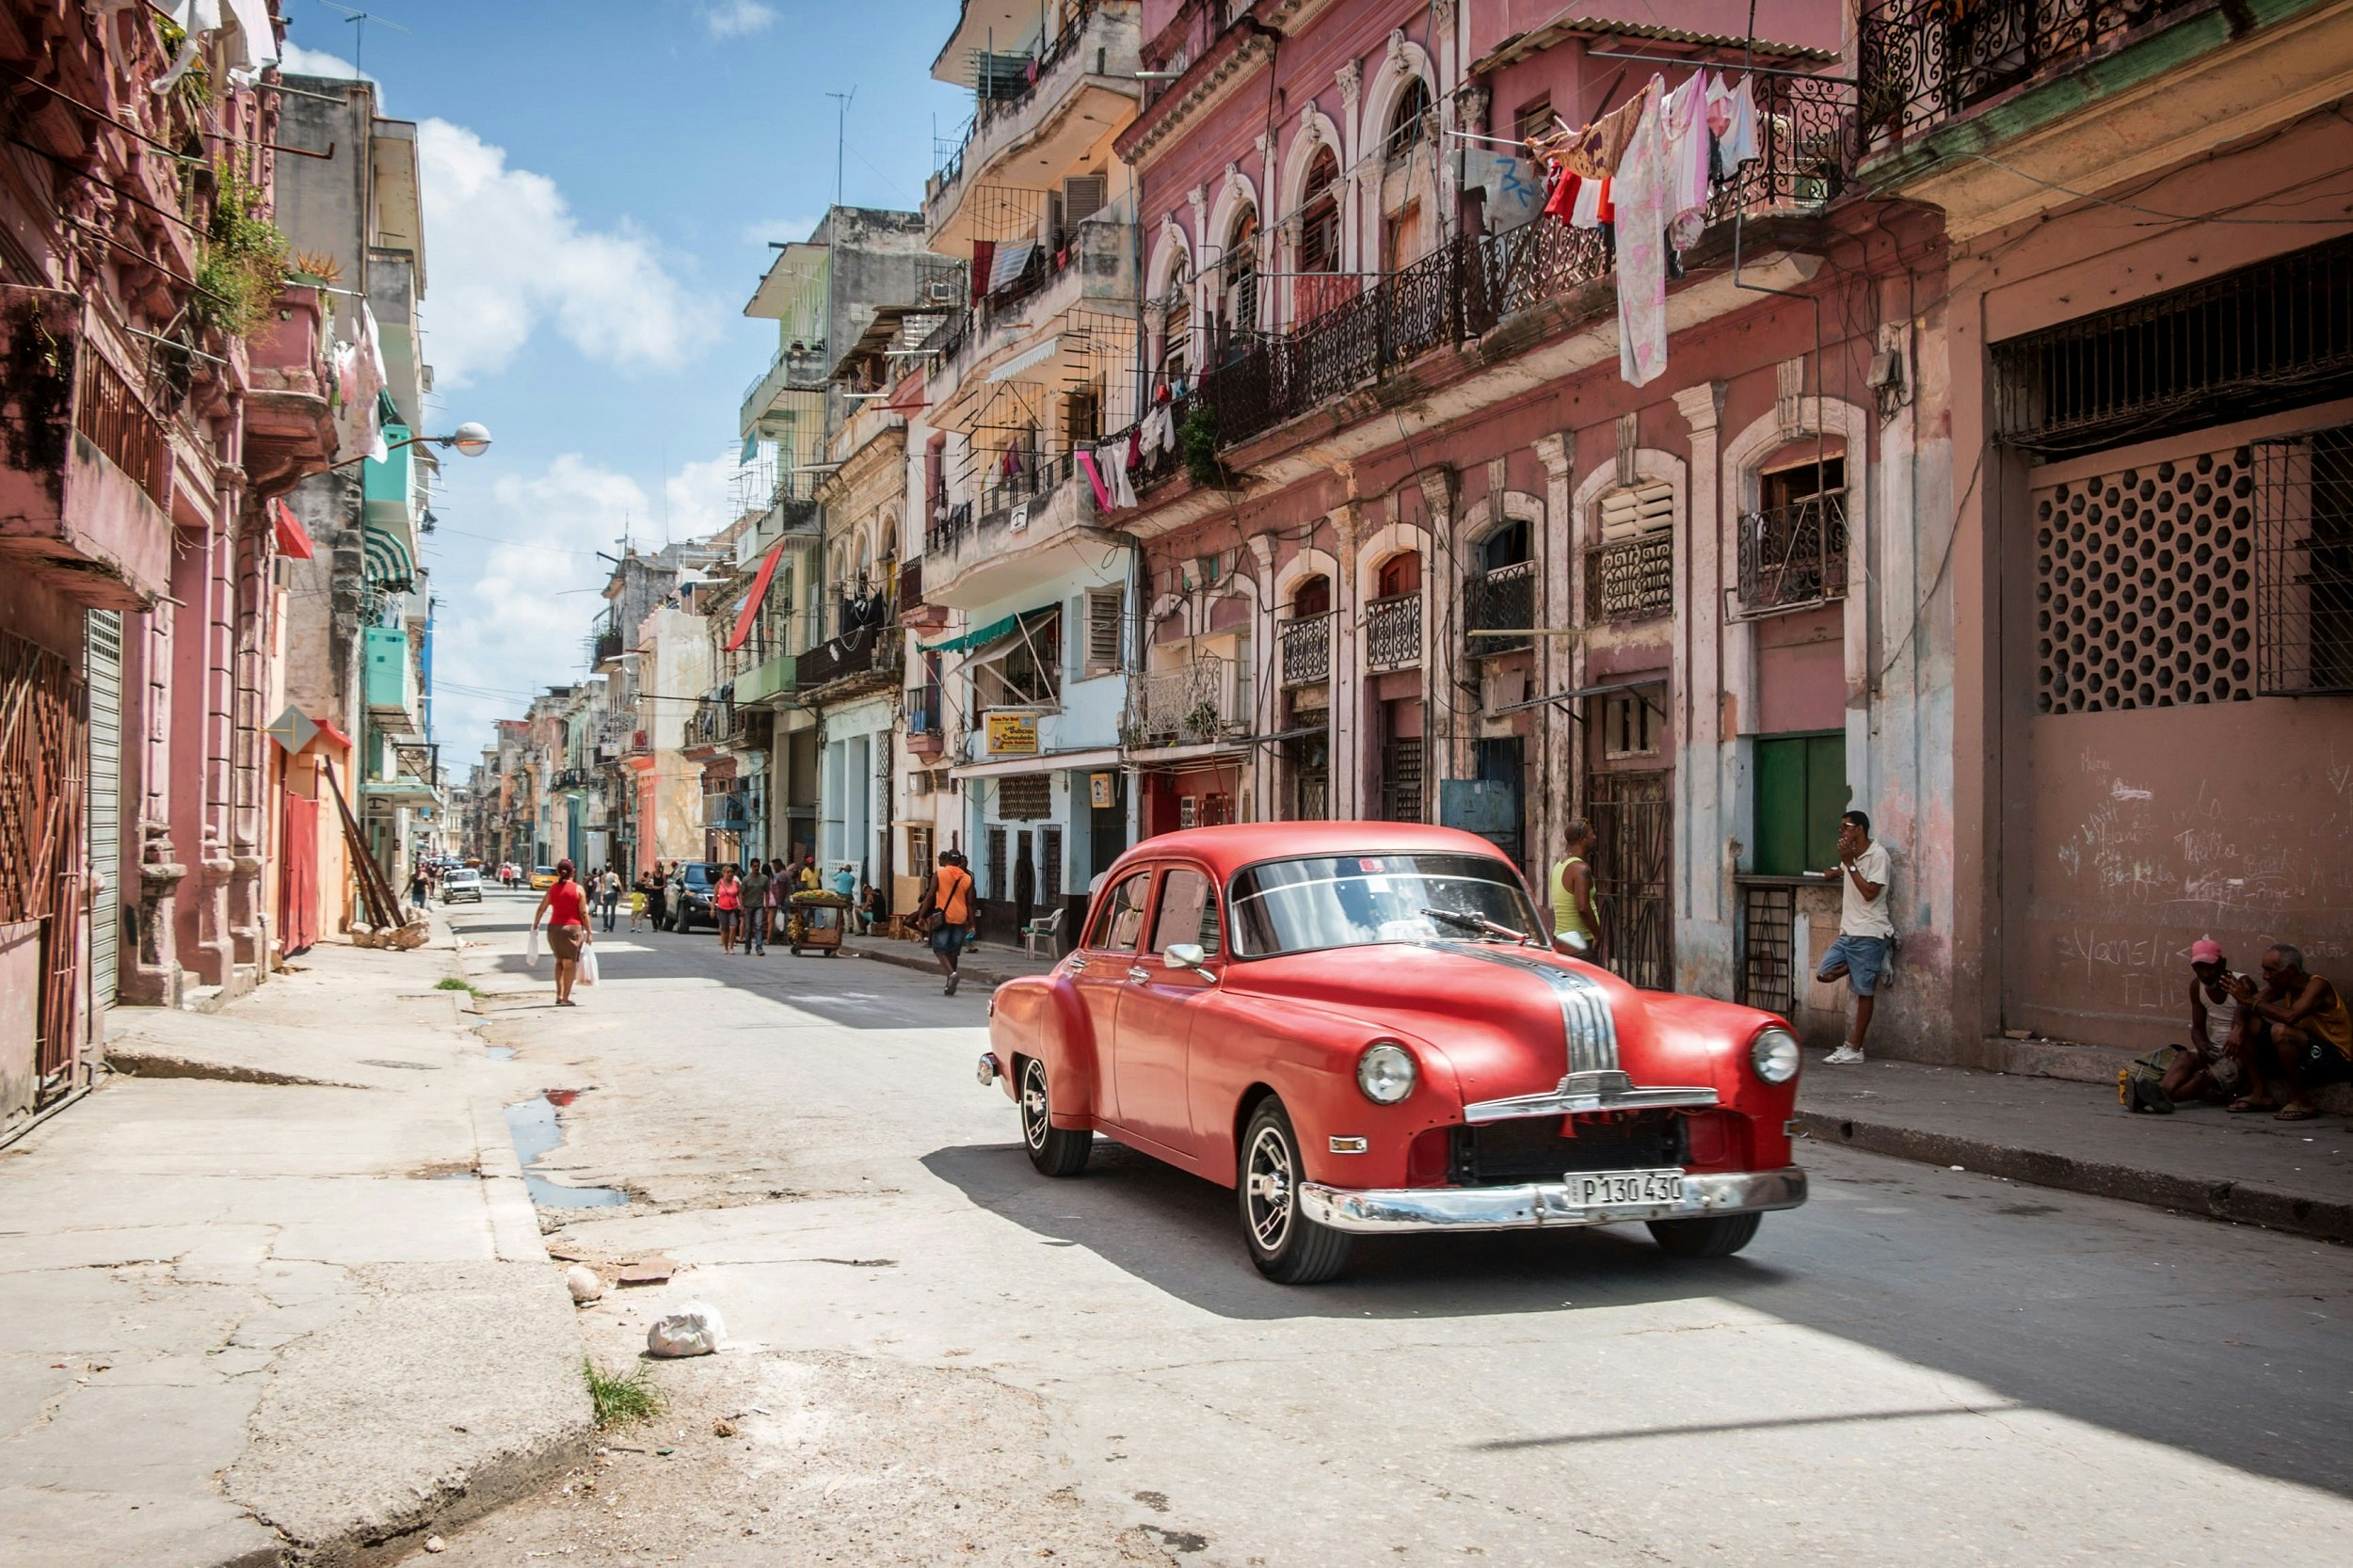 A classic American car is parked in a colorful street in Havana.